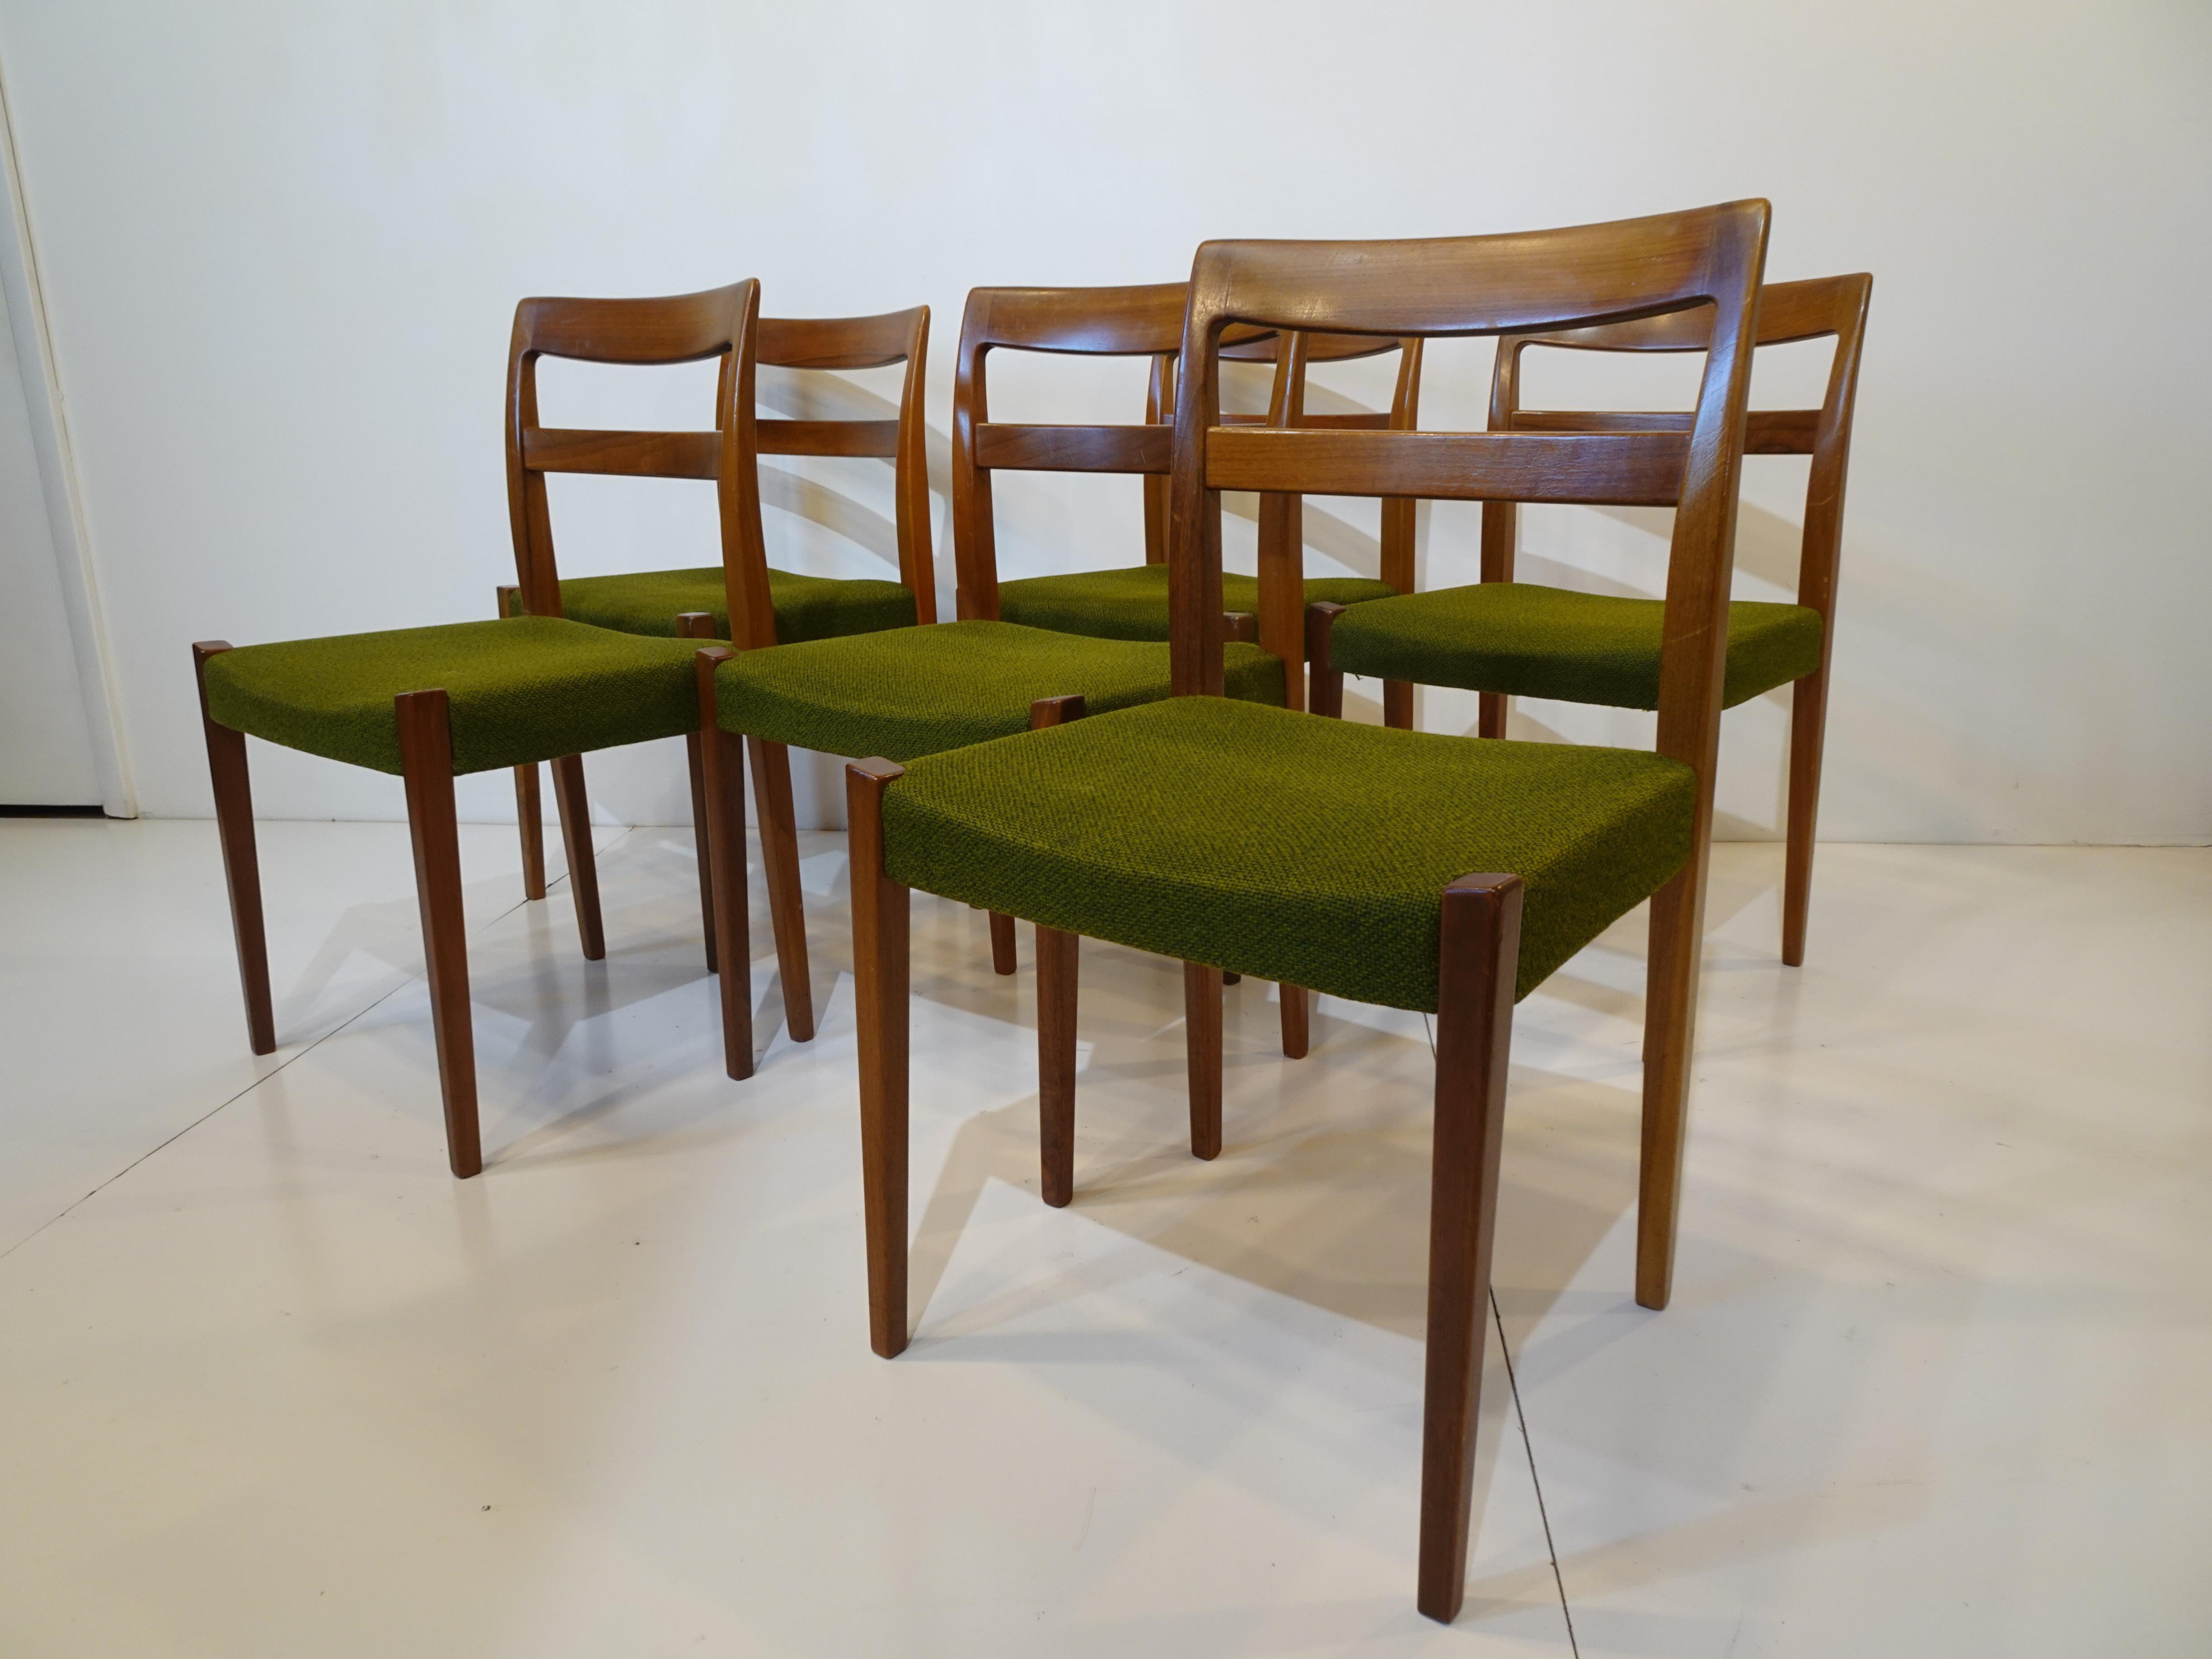 A set of six walnut framed dining chairs with original green woven upholstered seats, a simple design constructed very well for maximum sturdiness and dining comfort. Designed by Nils Jonsson manufactured by Troeds Bjarnum Sweden.